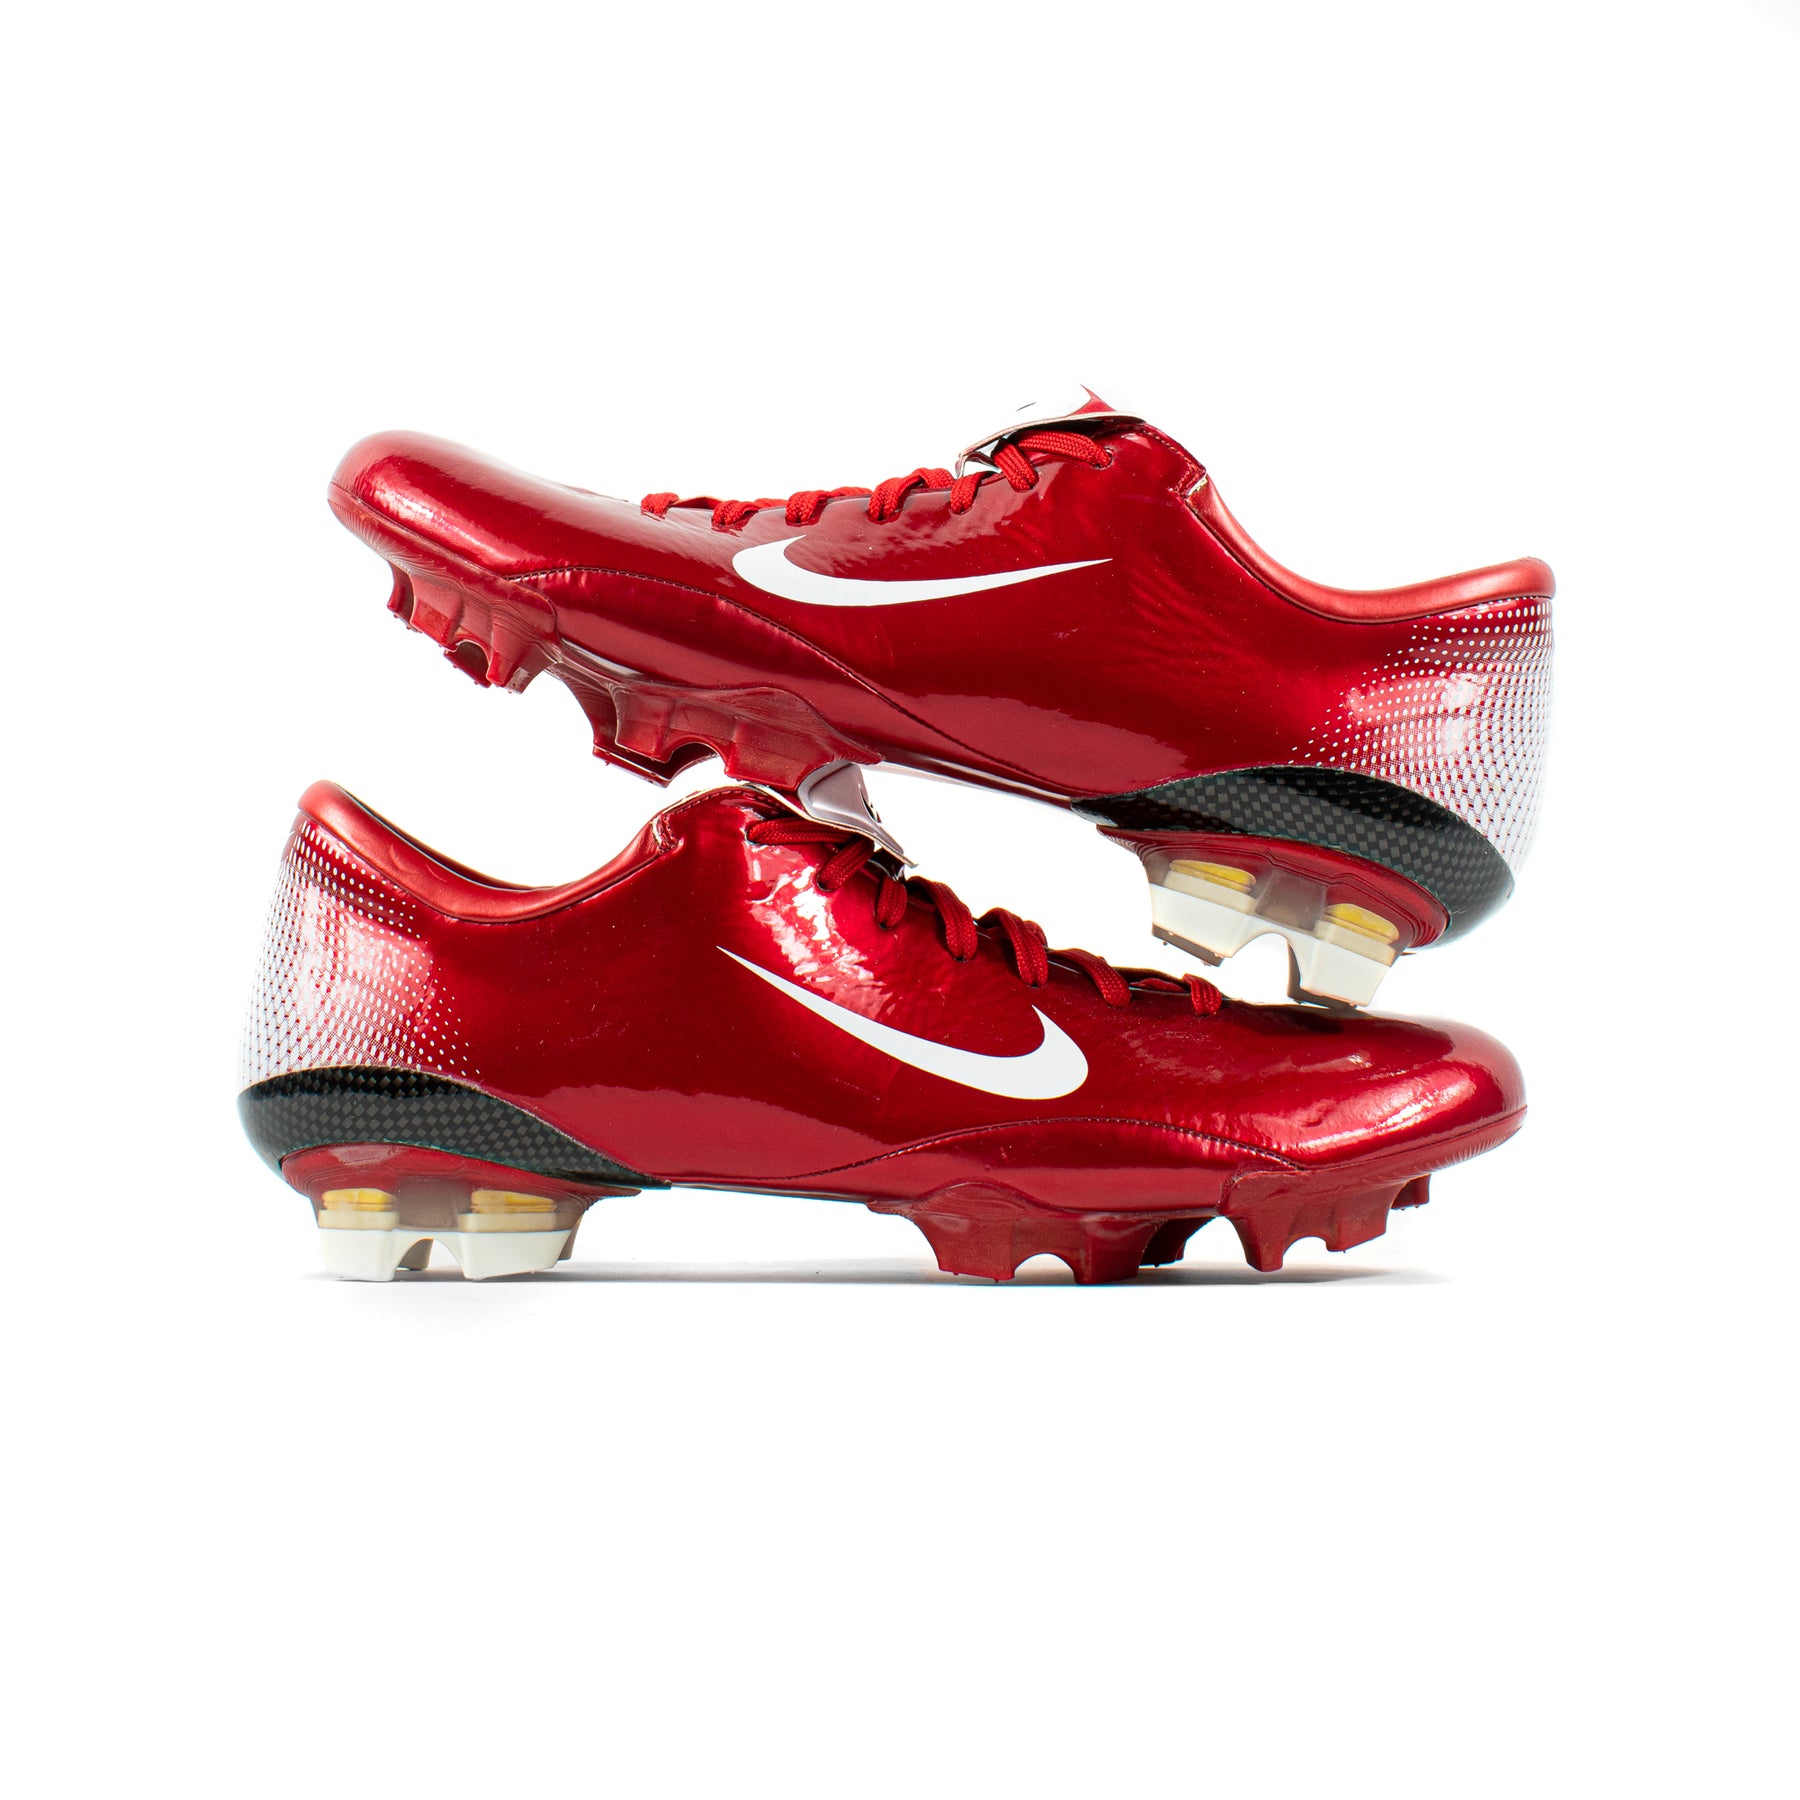 Nike Mercurial Sport Red – Classic Soccer Cleats